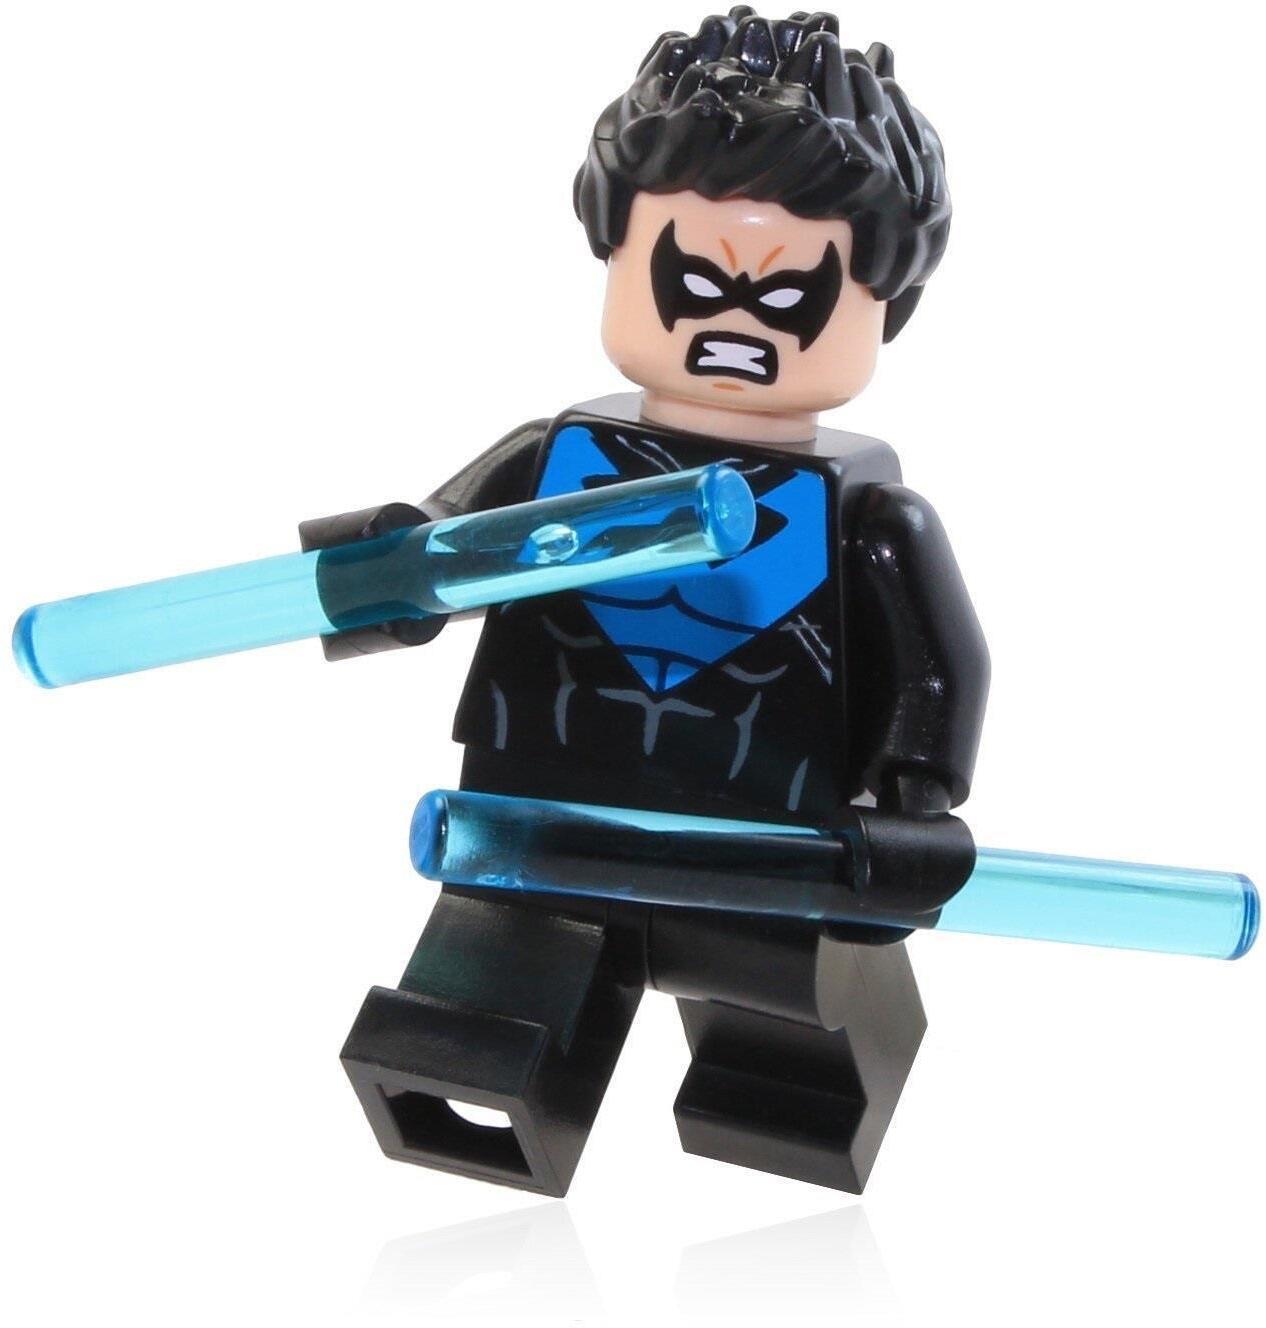 LEGO Limited Edition Nightwing DC Comics Superheroes Minifigure 30606 for sale online 